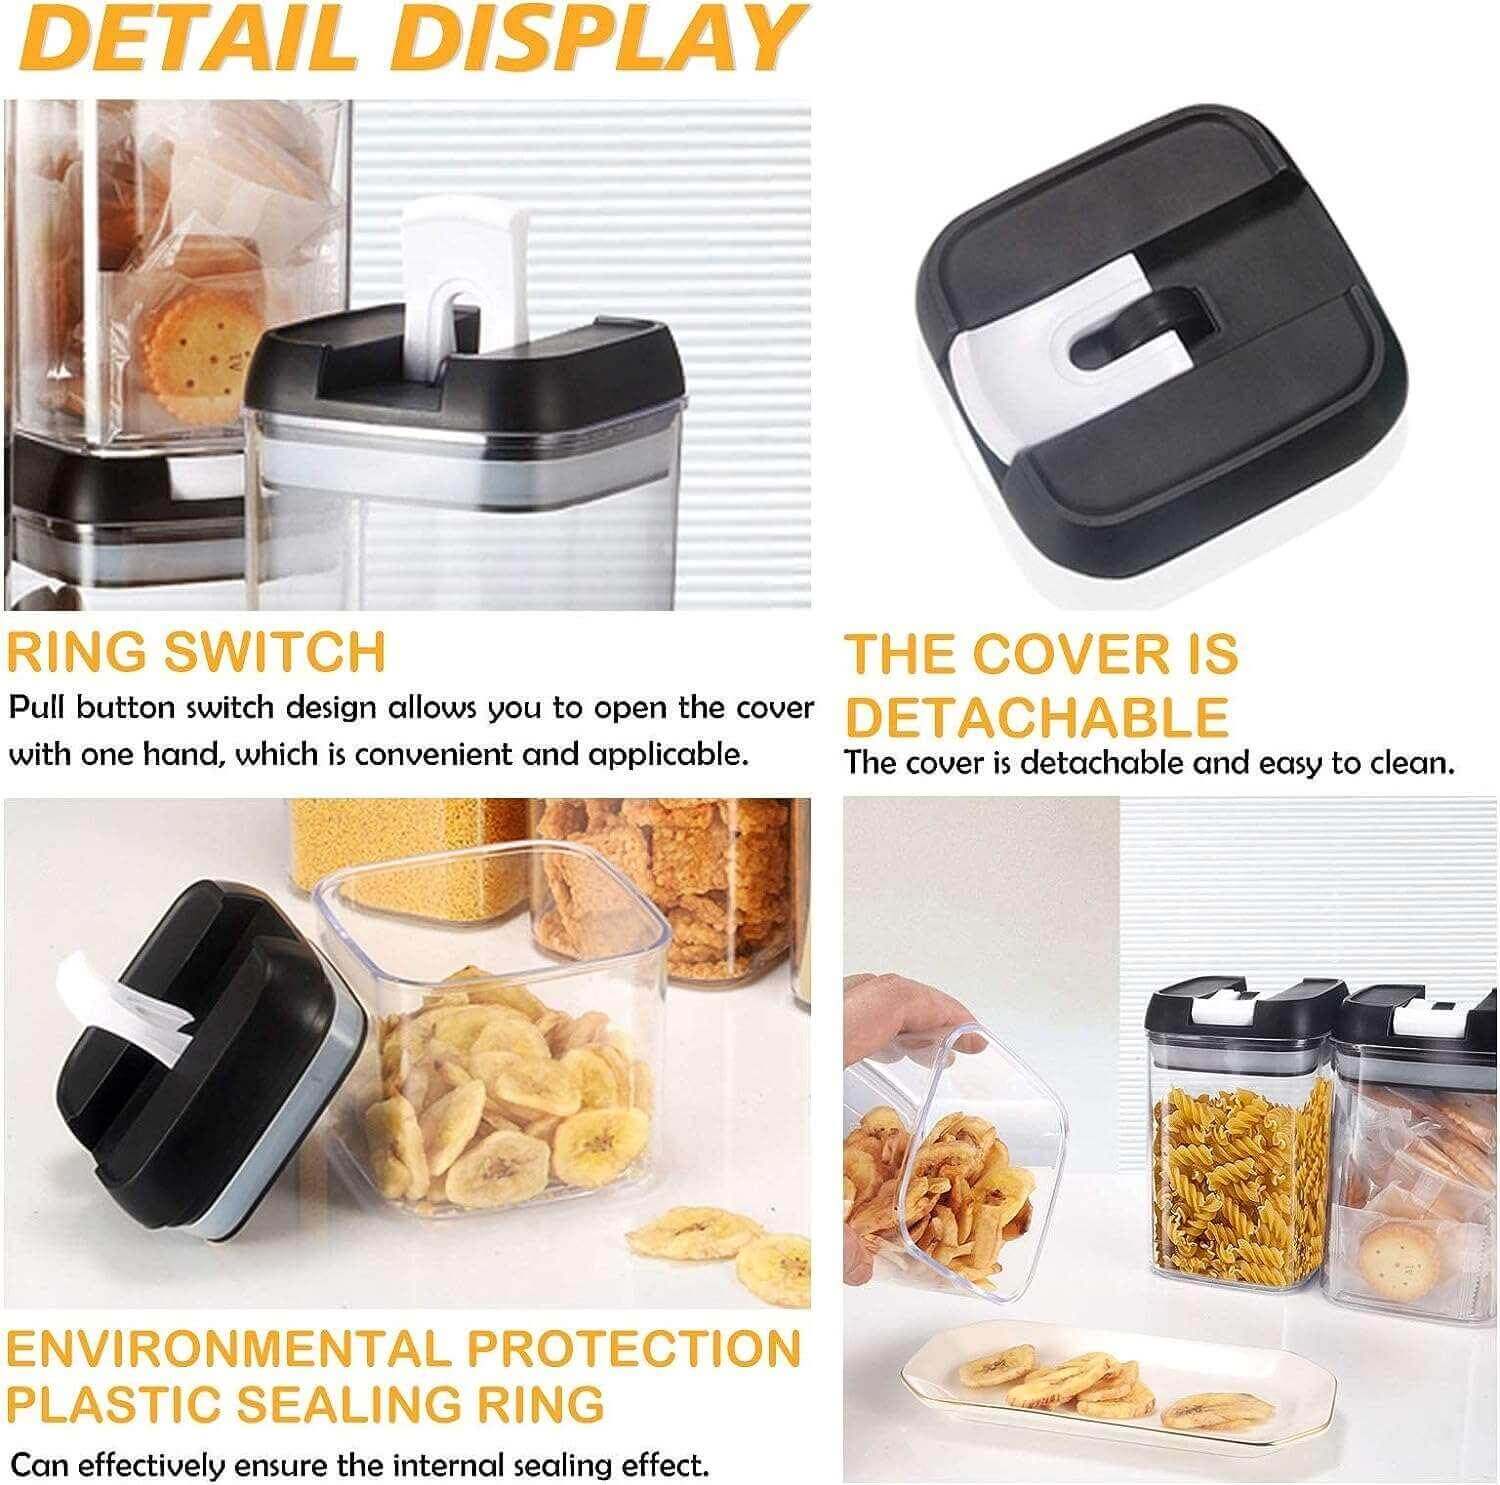 Set of 7 Airtight Food Storage Containers & Kitchen Storage Containers, BPA-Free Plastic Containers for Dry Food - enyaa